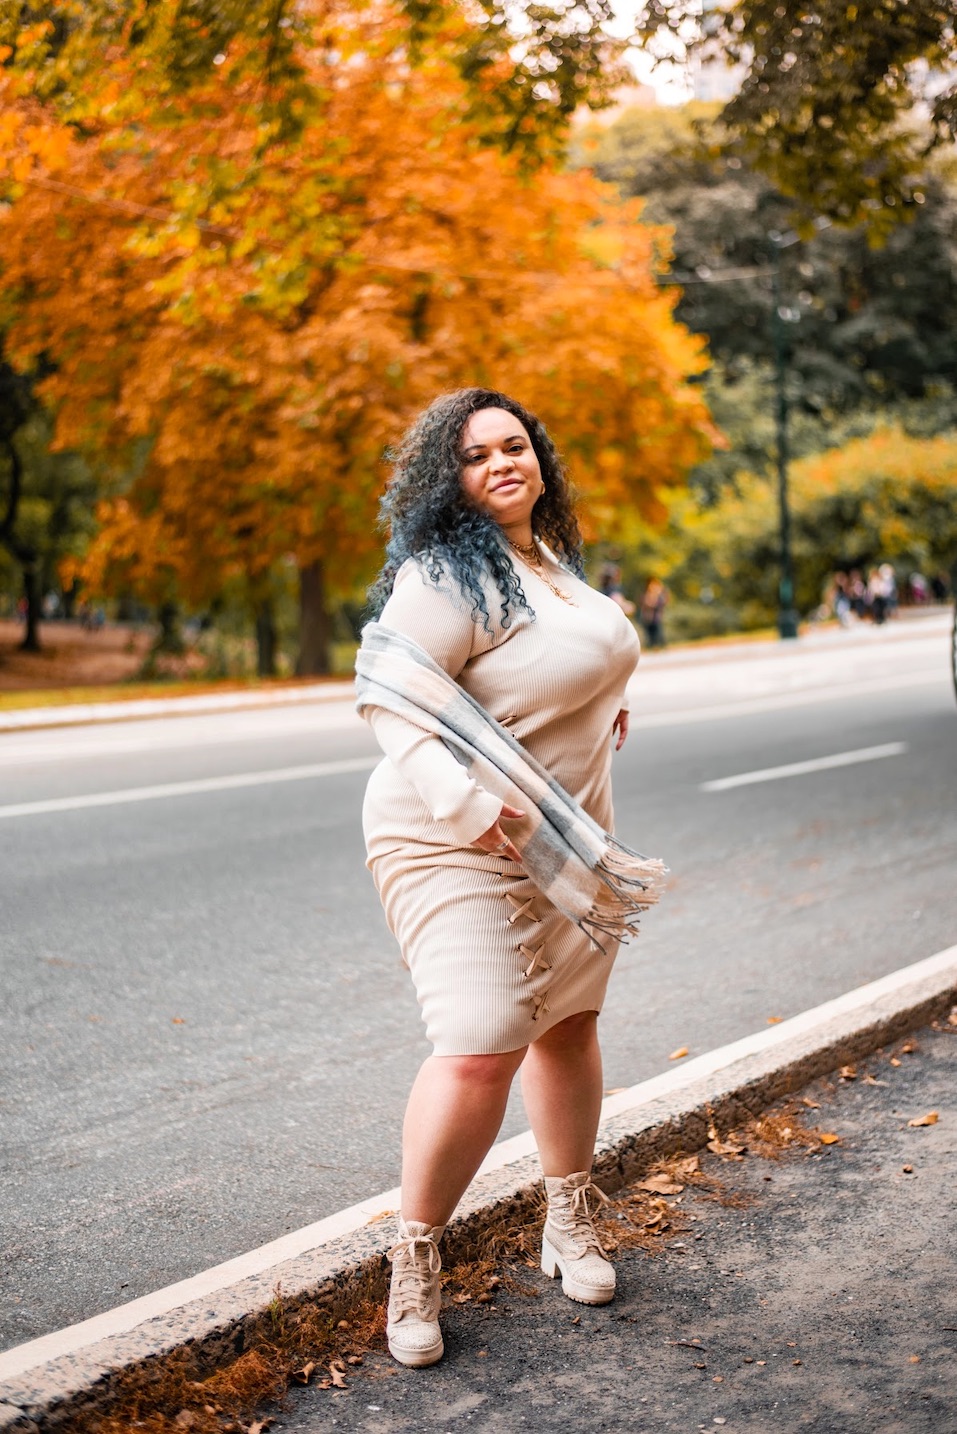 8 SWEATSUIT OUTFIT IDEAS FOR WINTER  Plus size winter outfits, Curvy  winter outfits, Winter fashion outfits